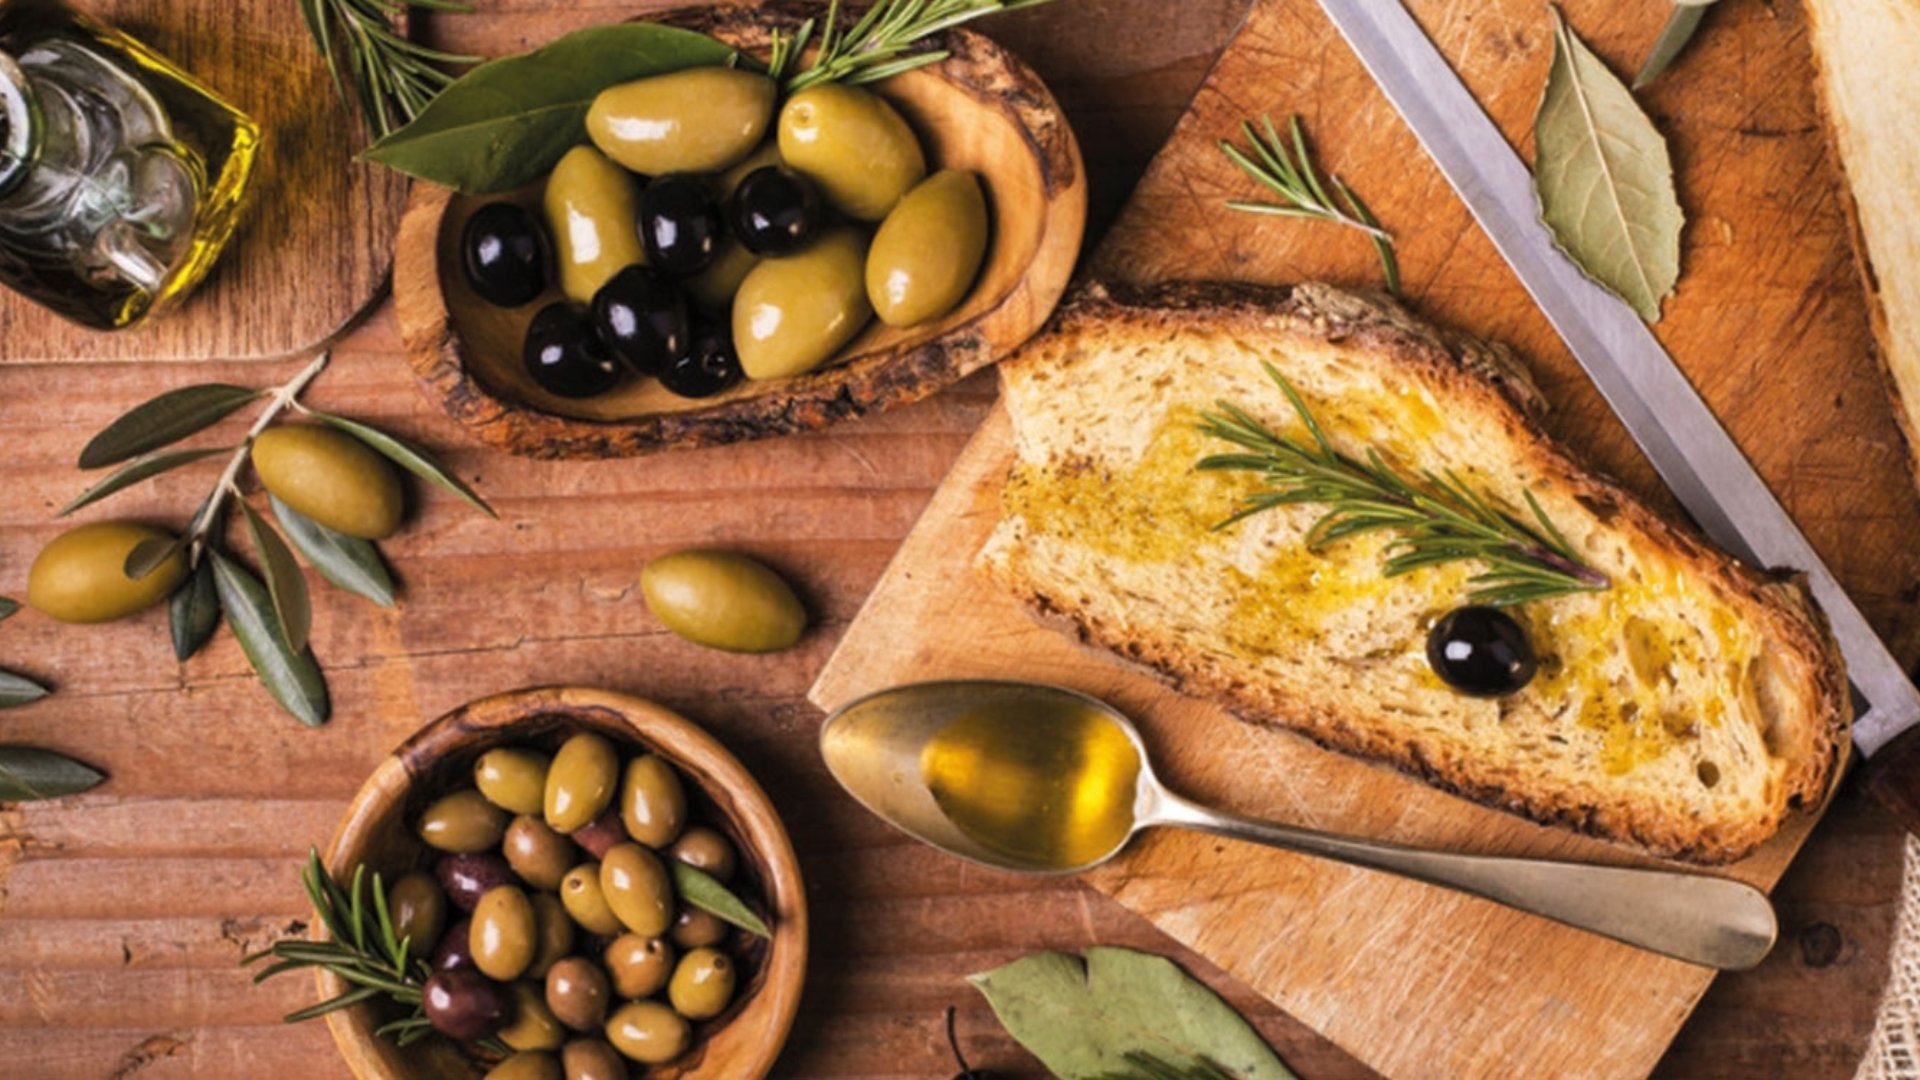 Our organic extra virgin olive oil that you can taste in the typical dishes of Tuscan tradition